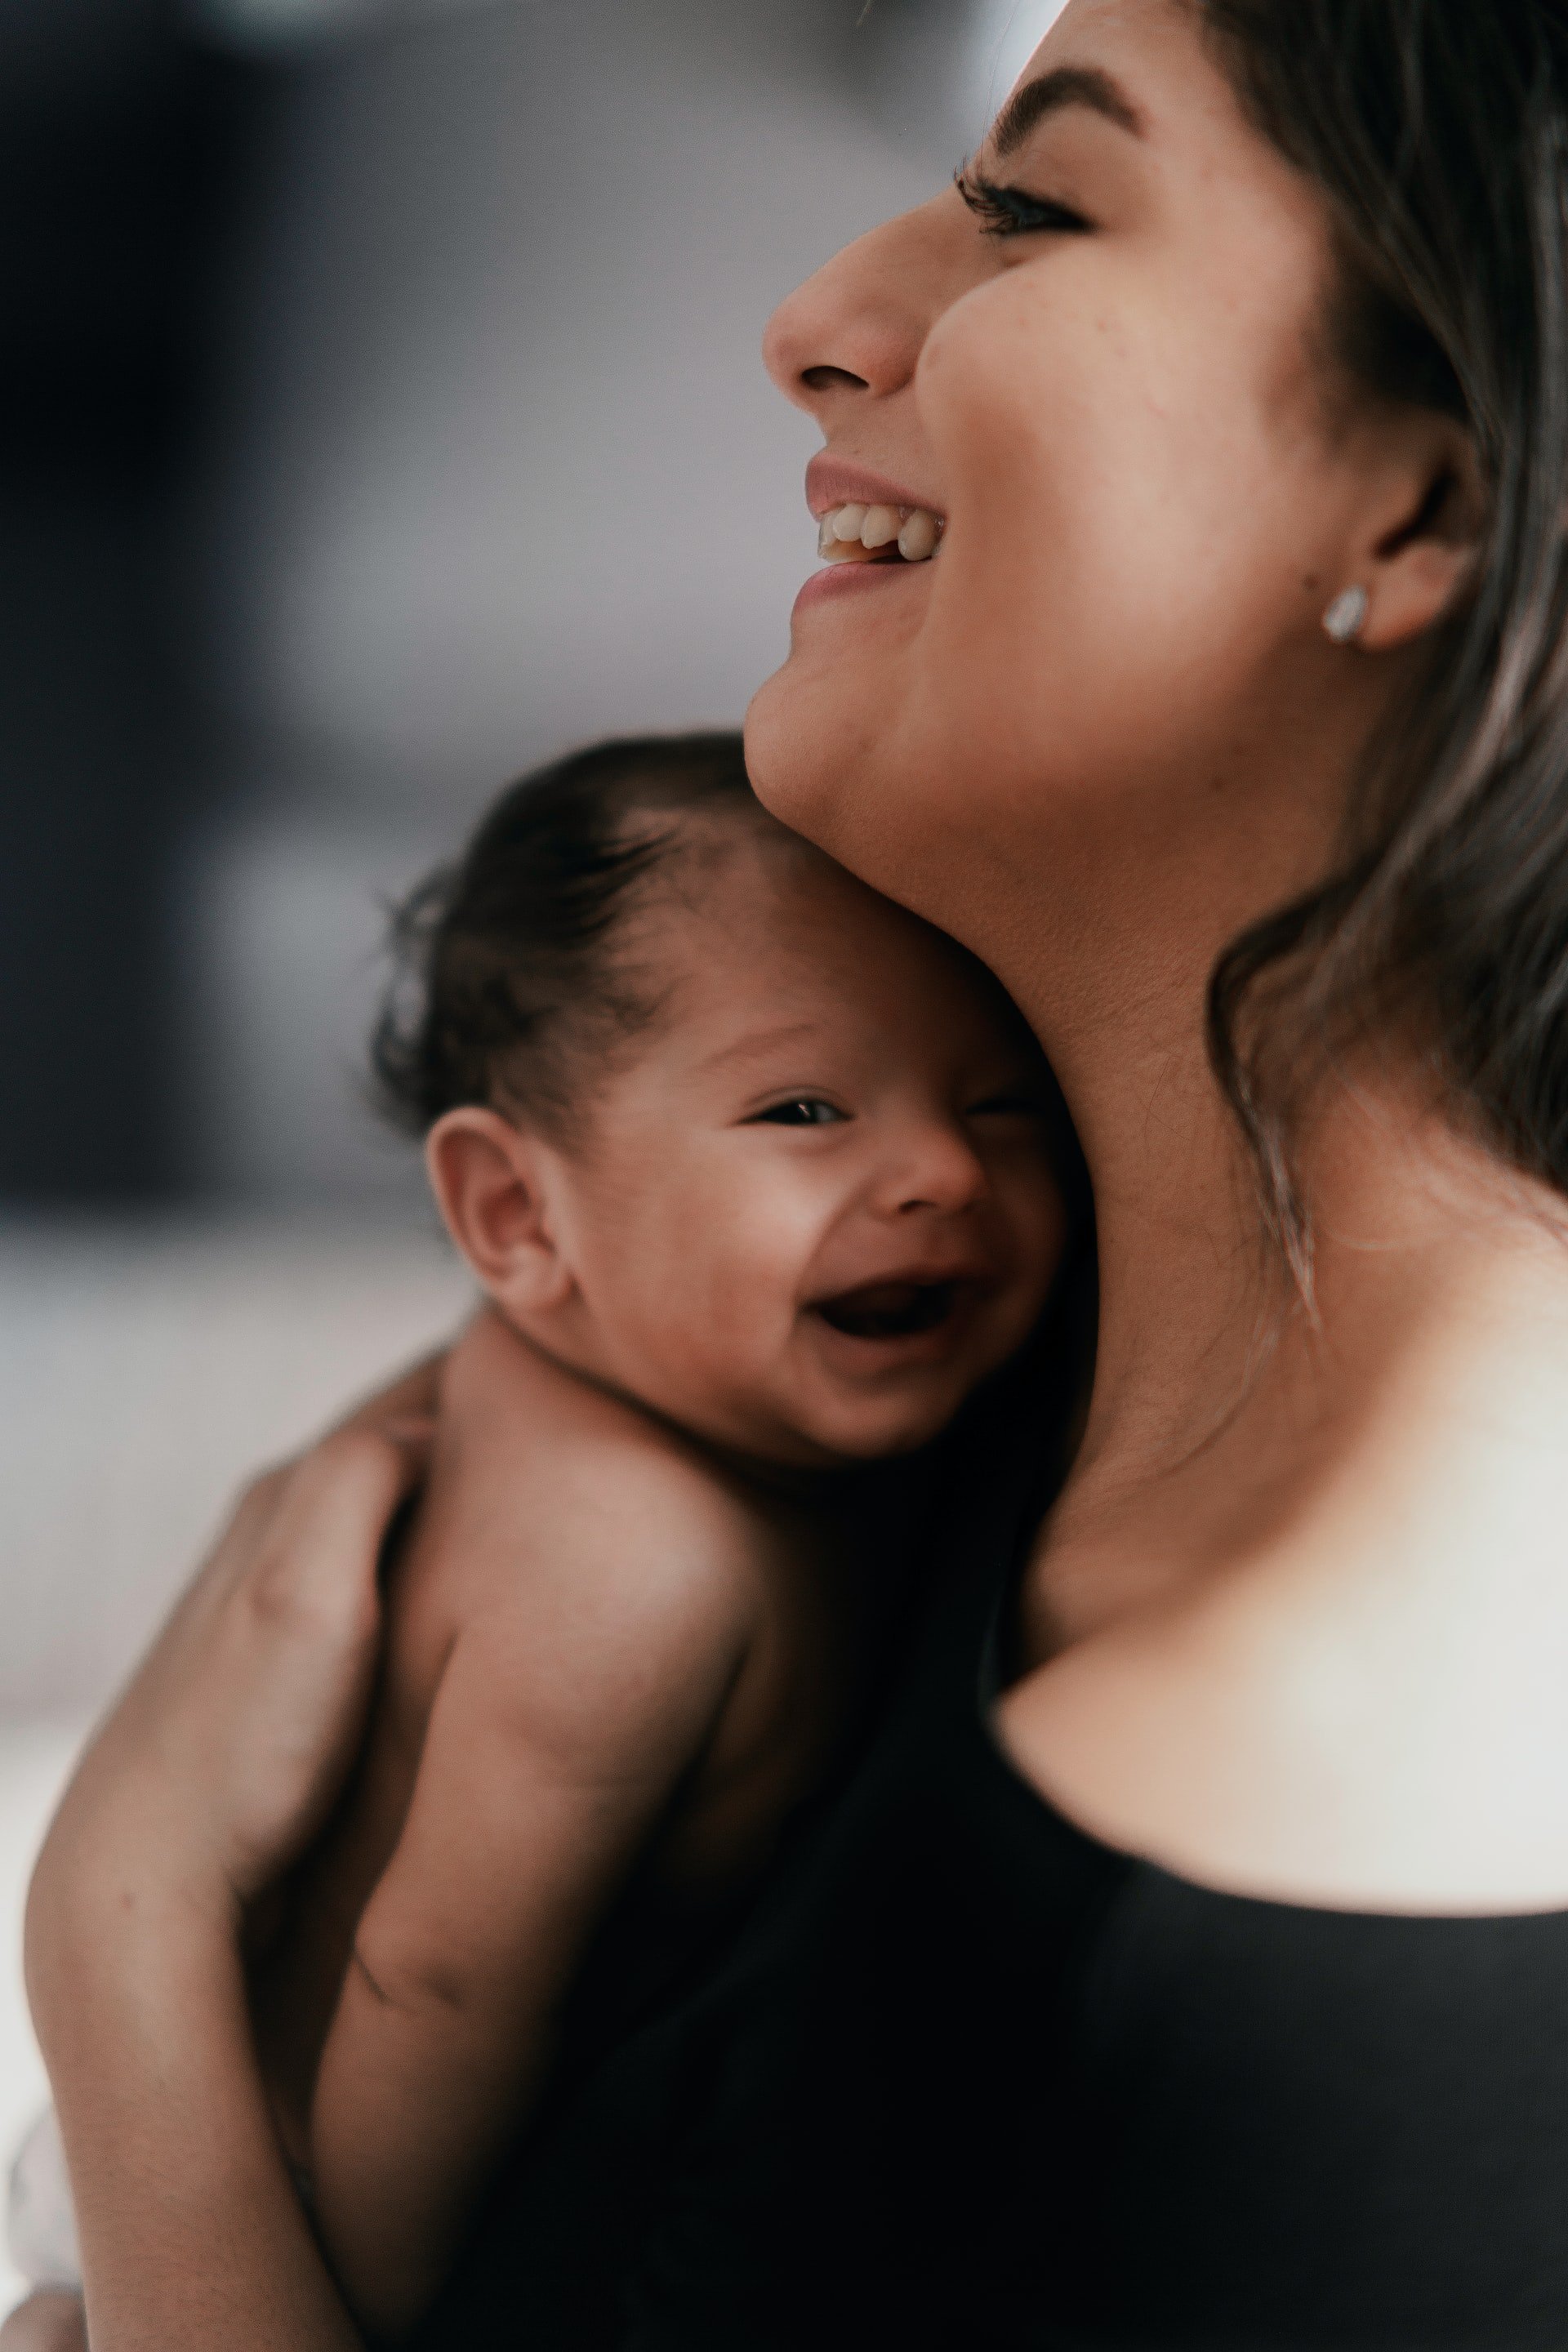 All that Alicia wanted from her third marriage was her baby. | Source: Unsplash